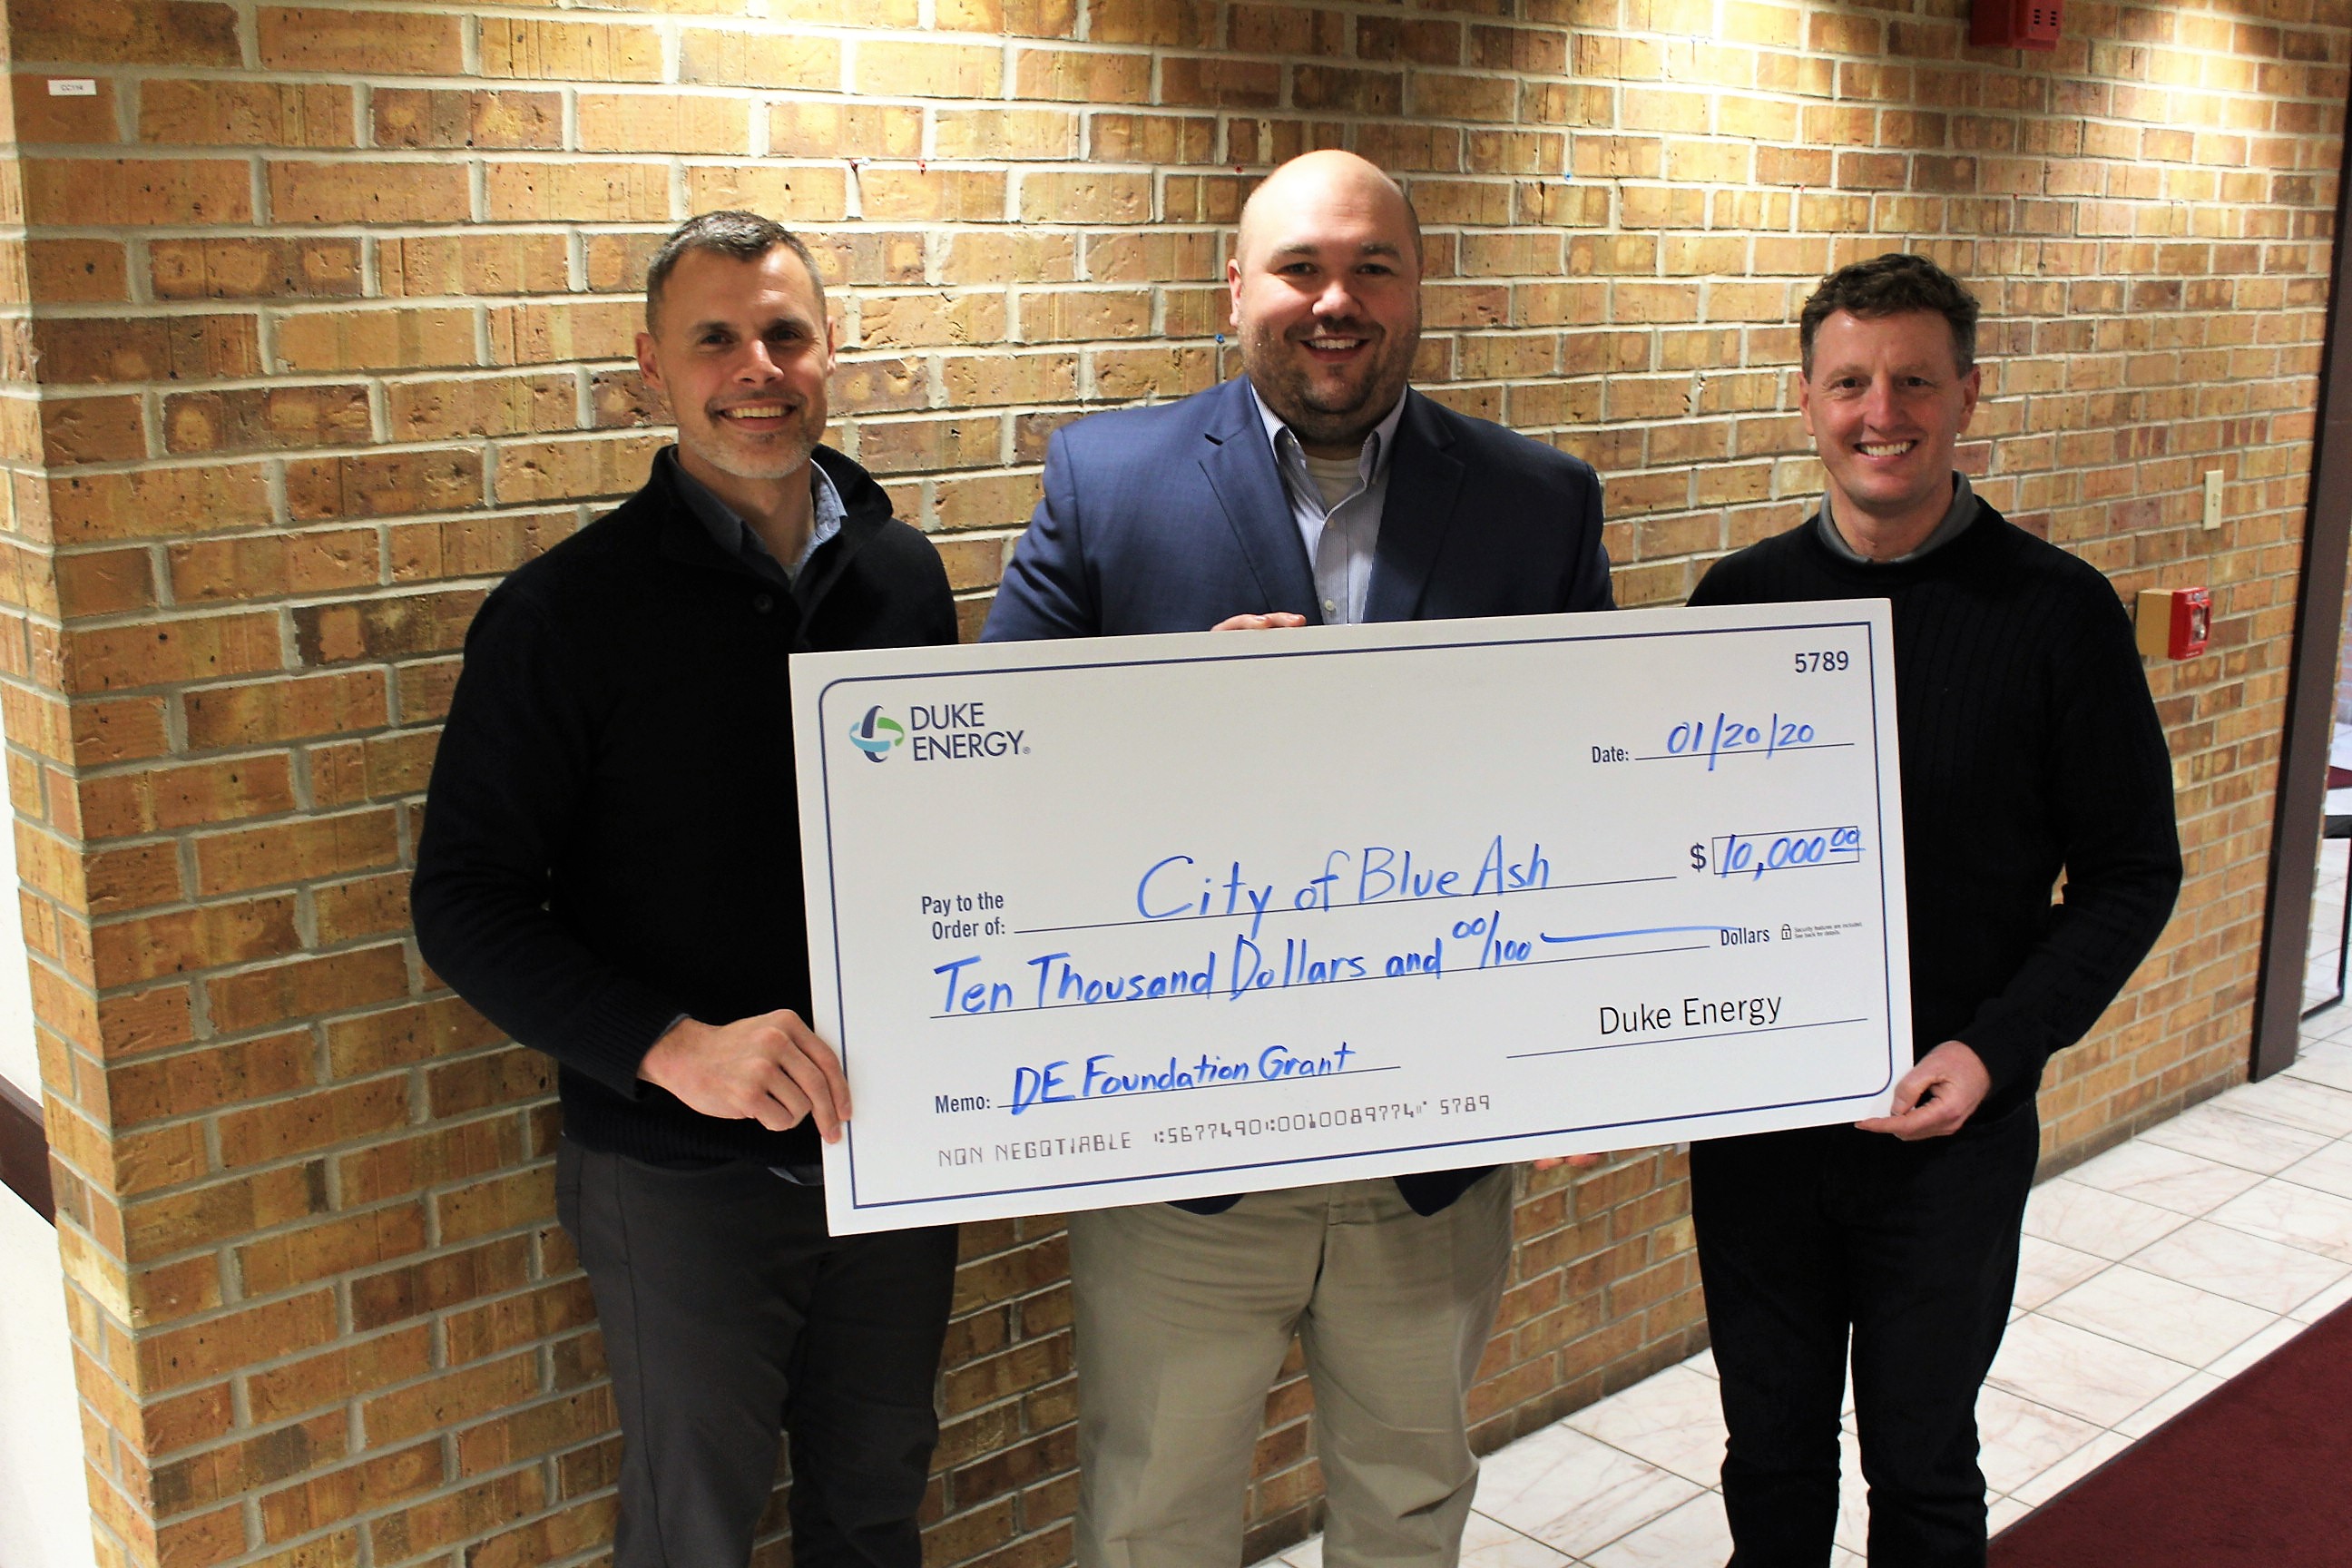 Blue Ash Parks and Recreation Director Brian Kruse, Duke Energy Sr. Government Affairs Specialist J. Chad Shaffer, and Blue Ash City Manager David Waltz holding giant check